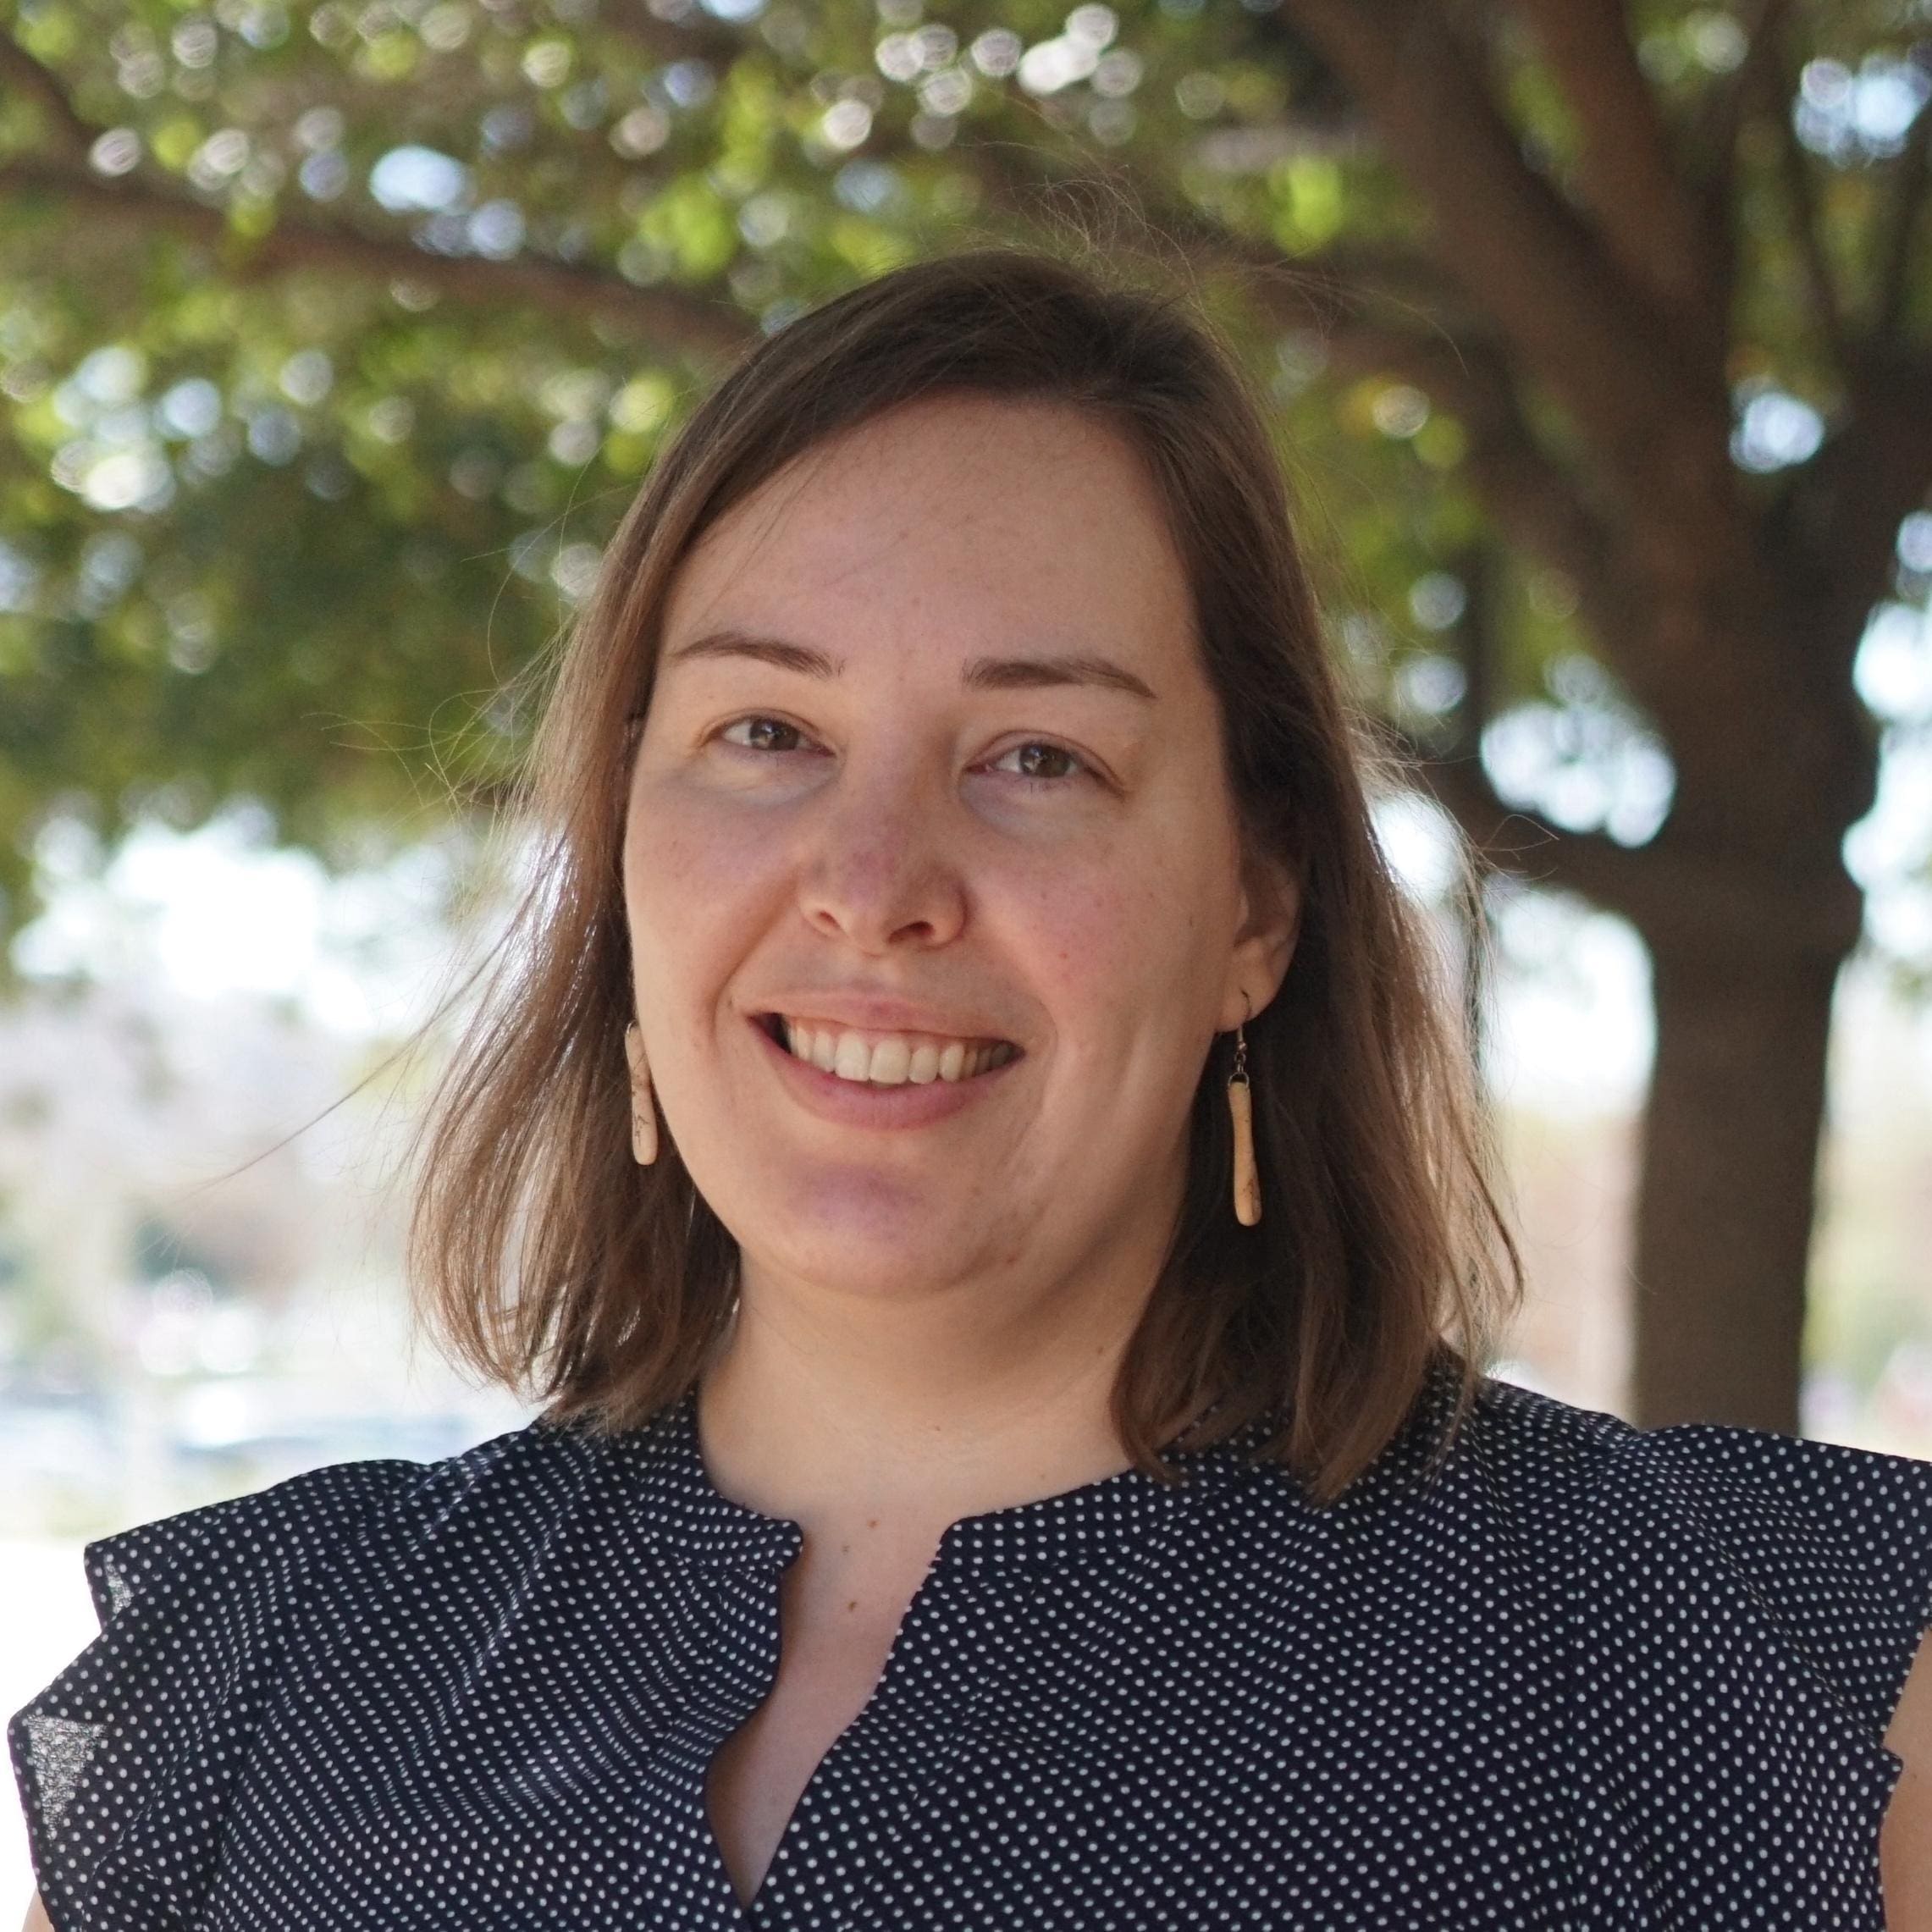 Immunology Award Finalist Dr. Lisa Wagar Deciphers Immune Responses to Viruses and Vaccines